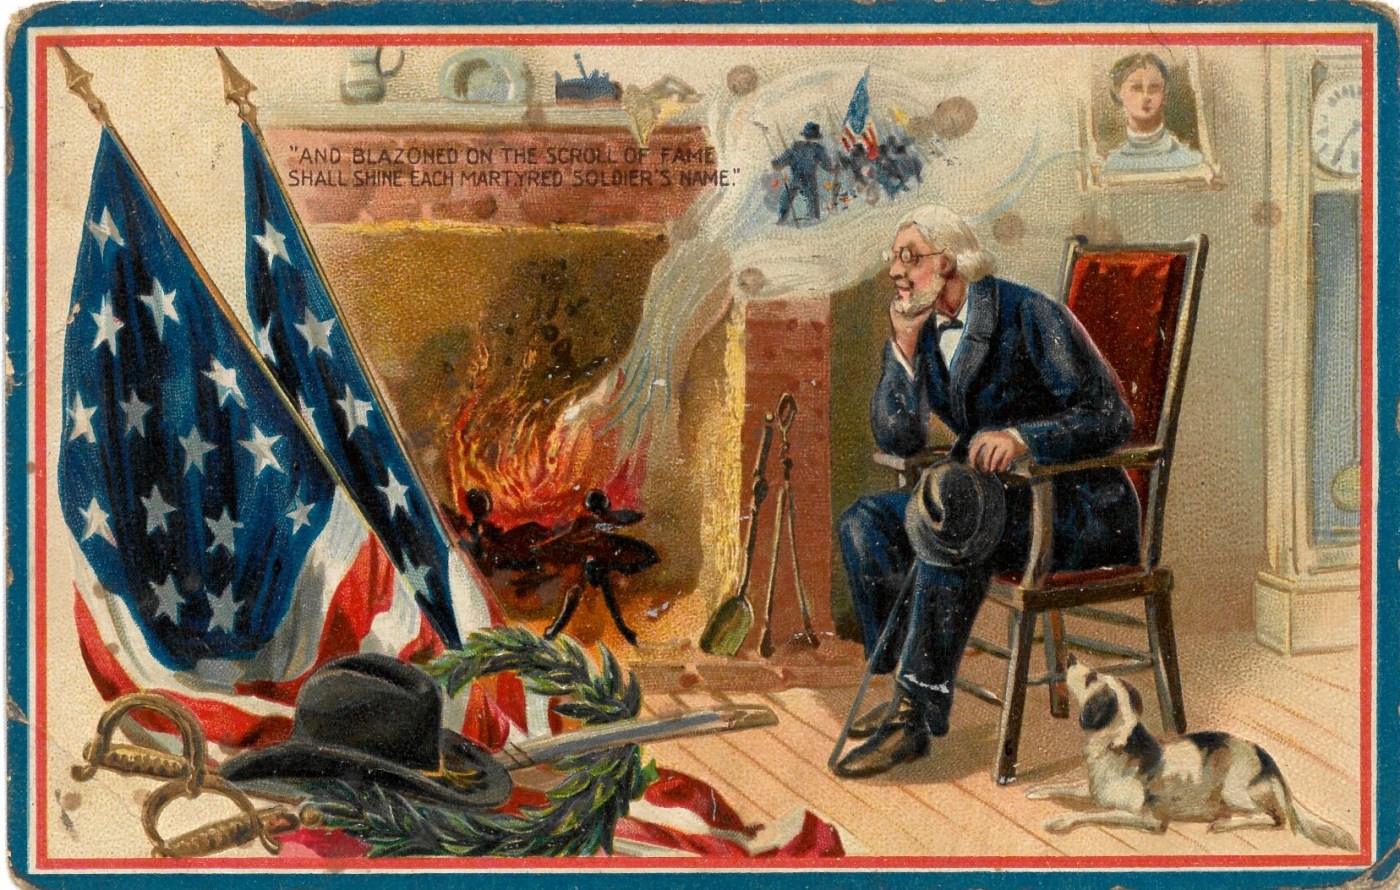 “’Decoration Day’ Series of Post Cards, No. 158,” cancelled June 3, 1912. Raphael Tuck & Son’s, 1908. Verse from “Gettysburg” by Francis De Haes Janvier, 1866. (NCA)